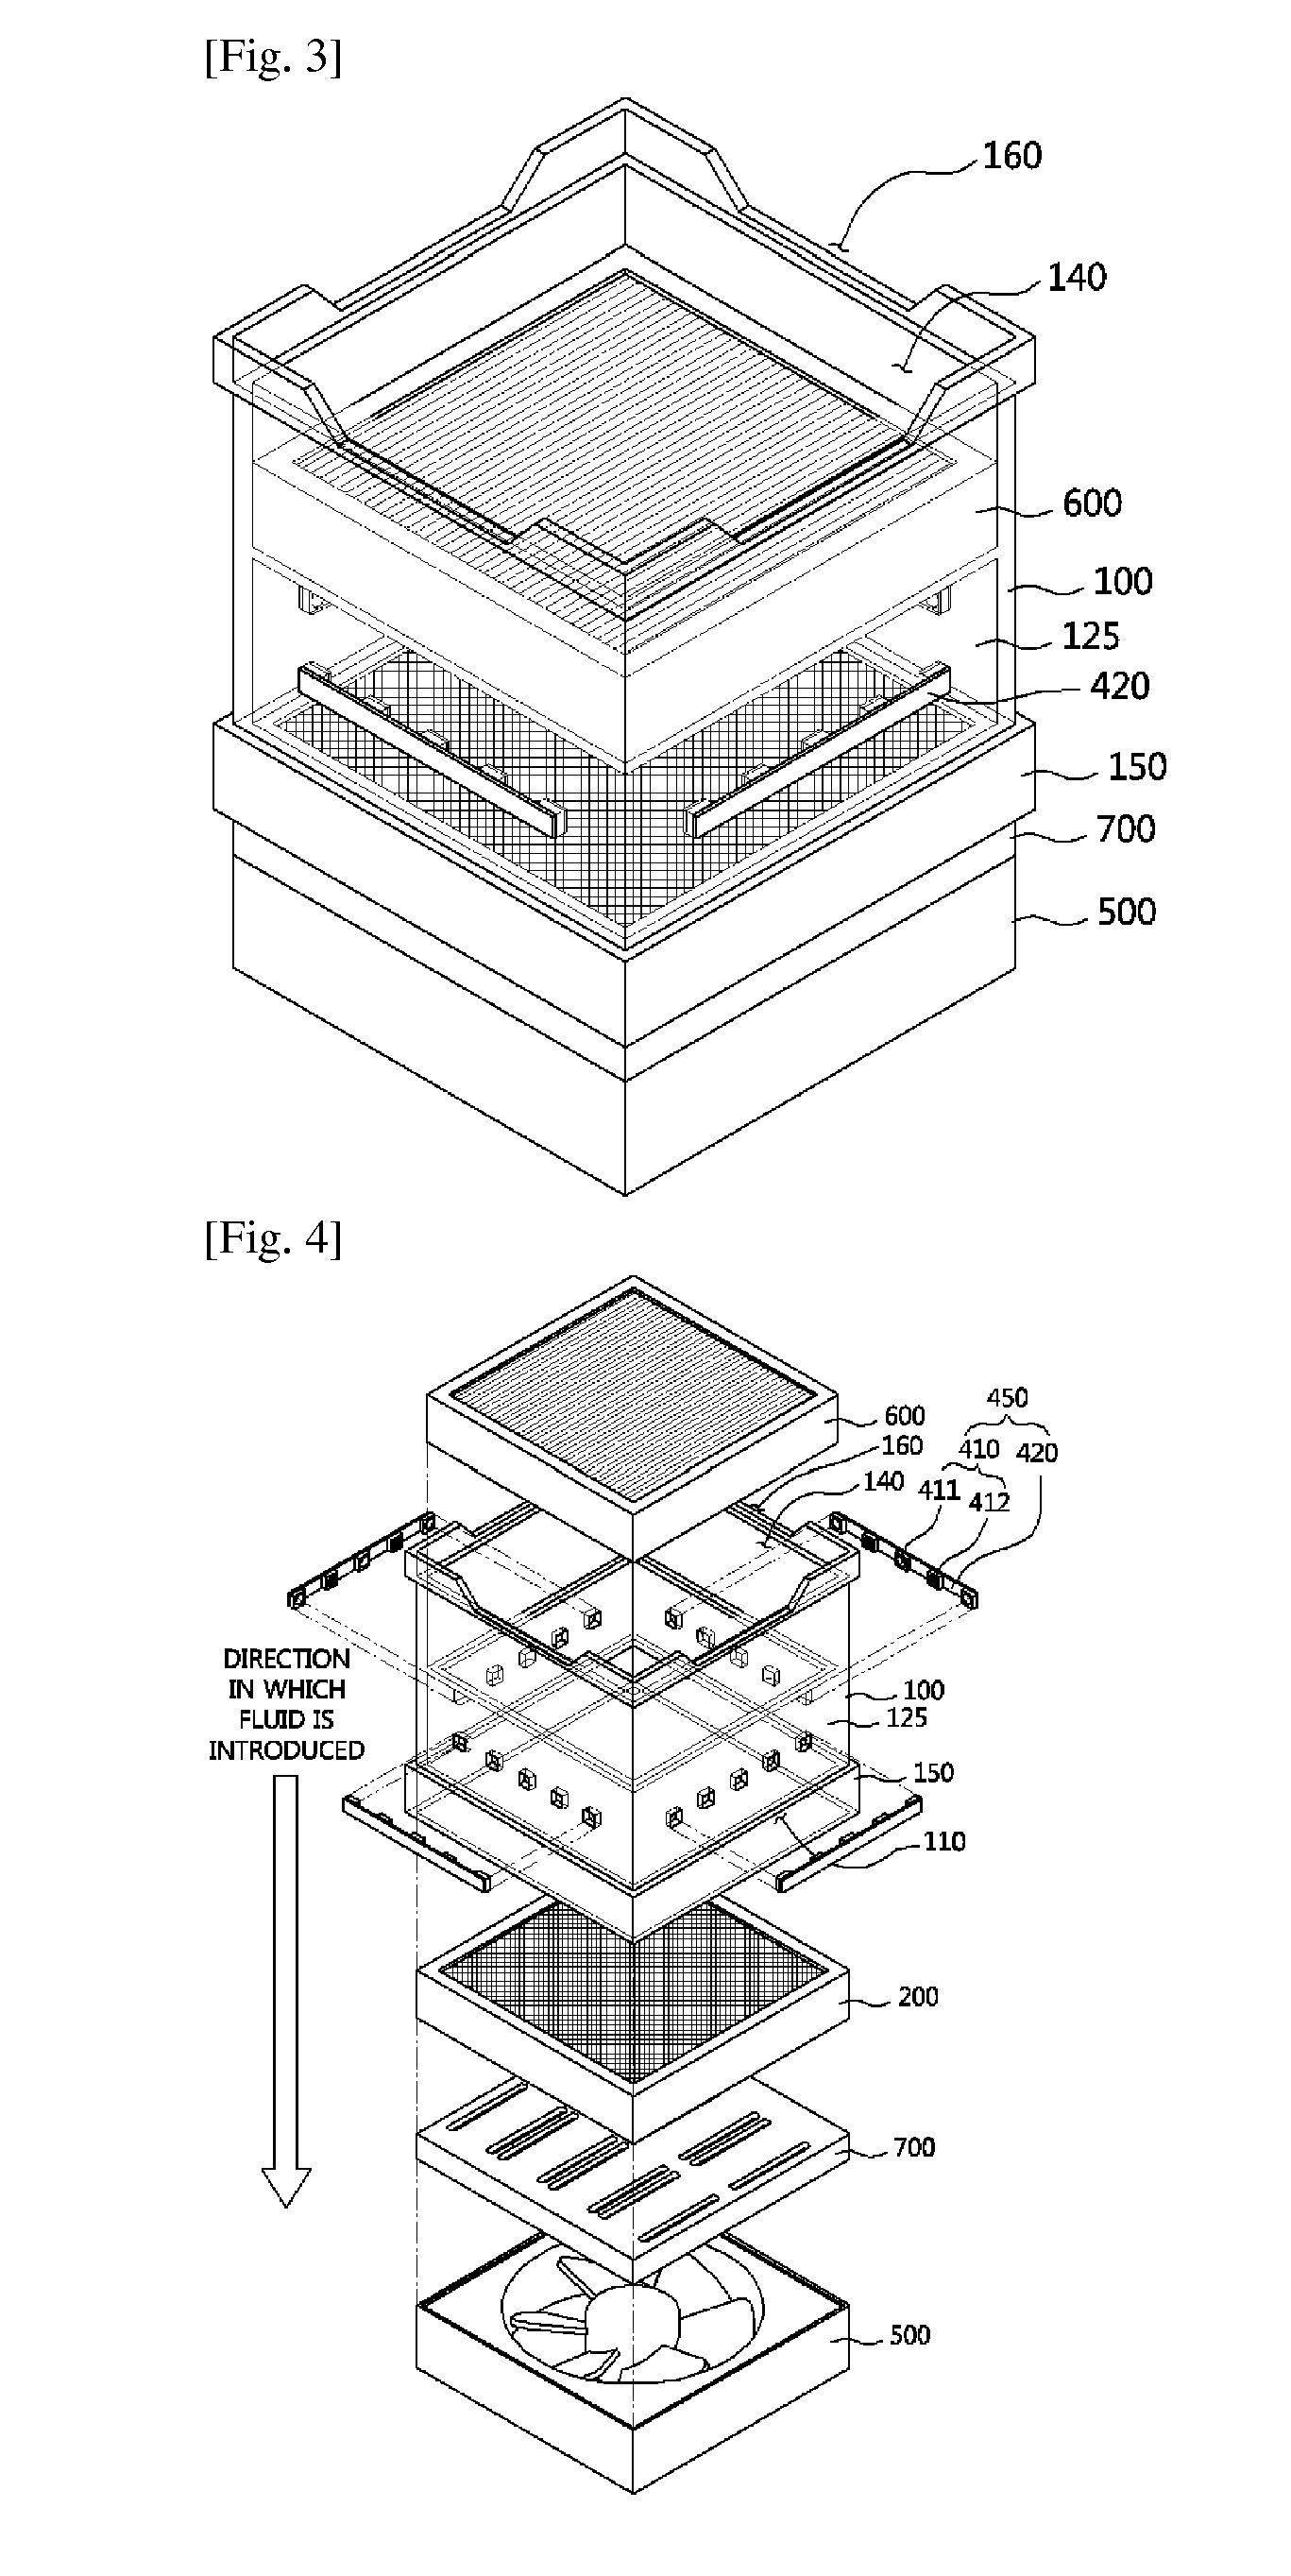 Apparatus for cleaning fluid